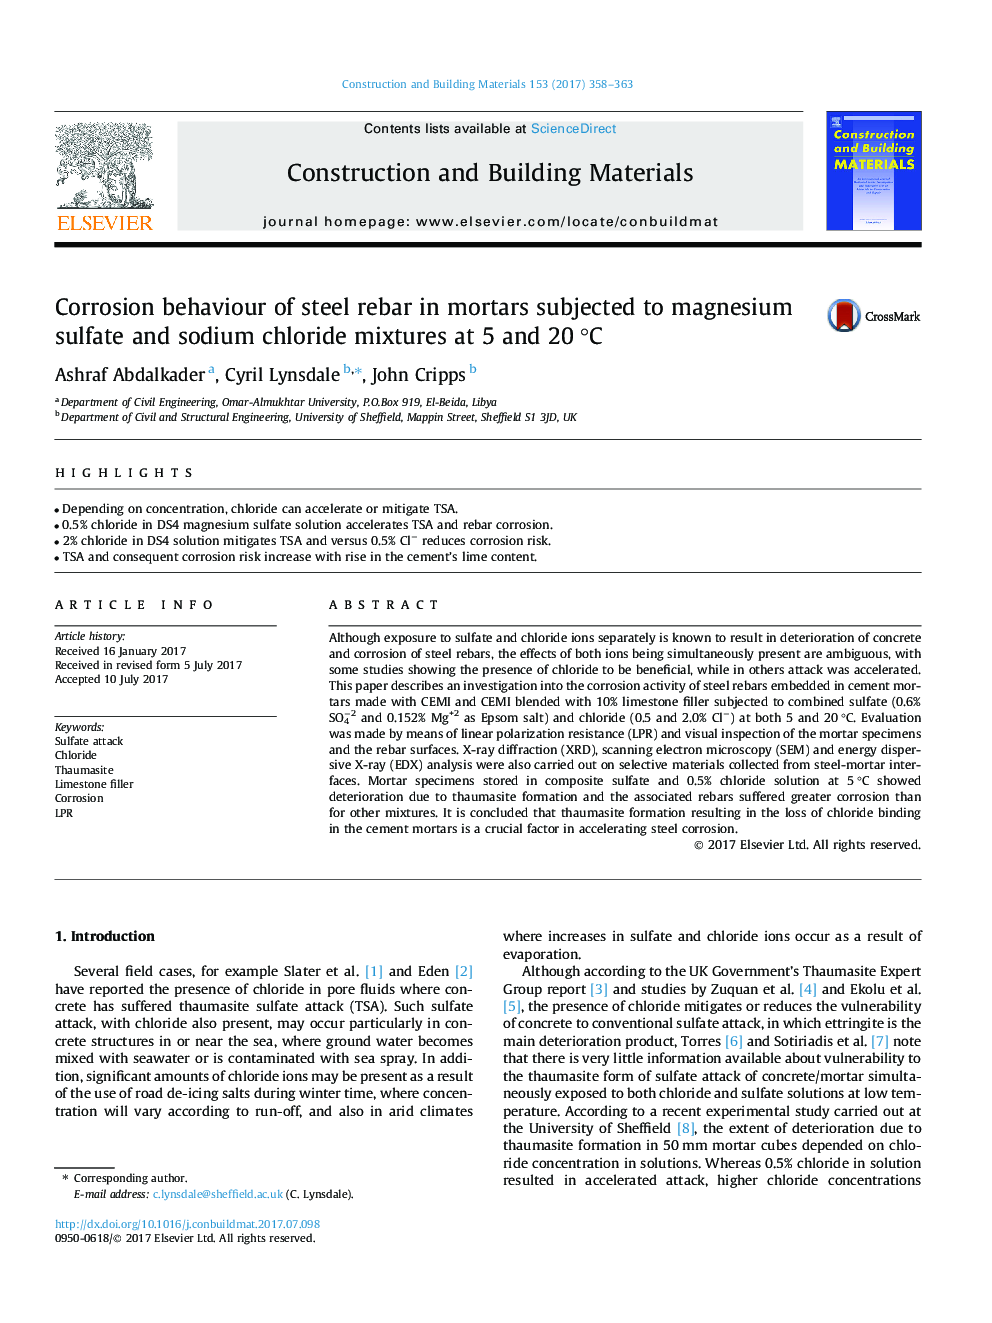 Corrosion behaviour of steel rebar in mortars subjected to magnesium sulfate and sodium chloride mixtures at 5 and 20Â Â°C